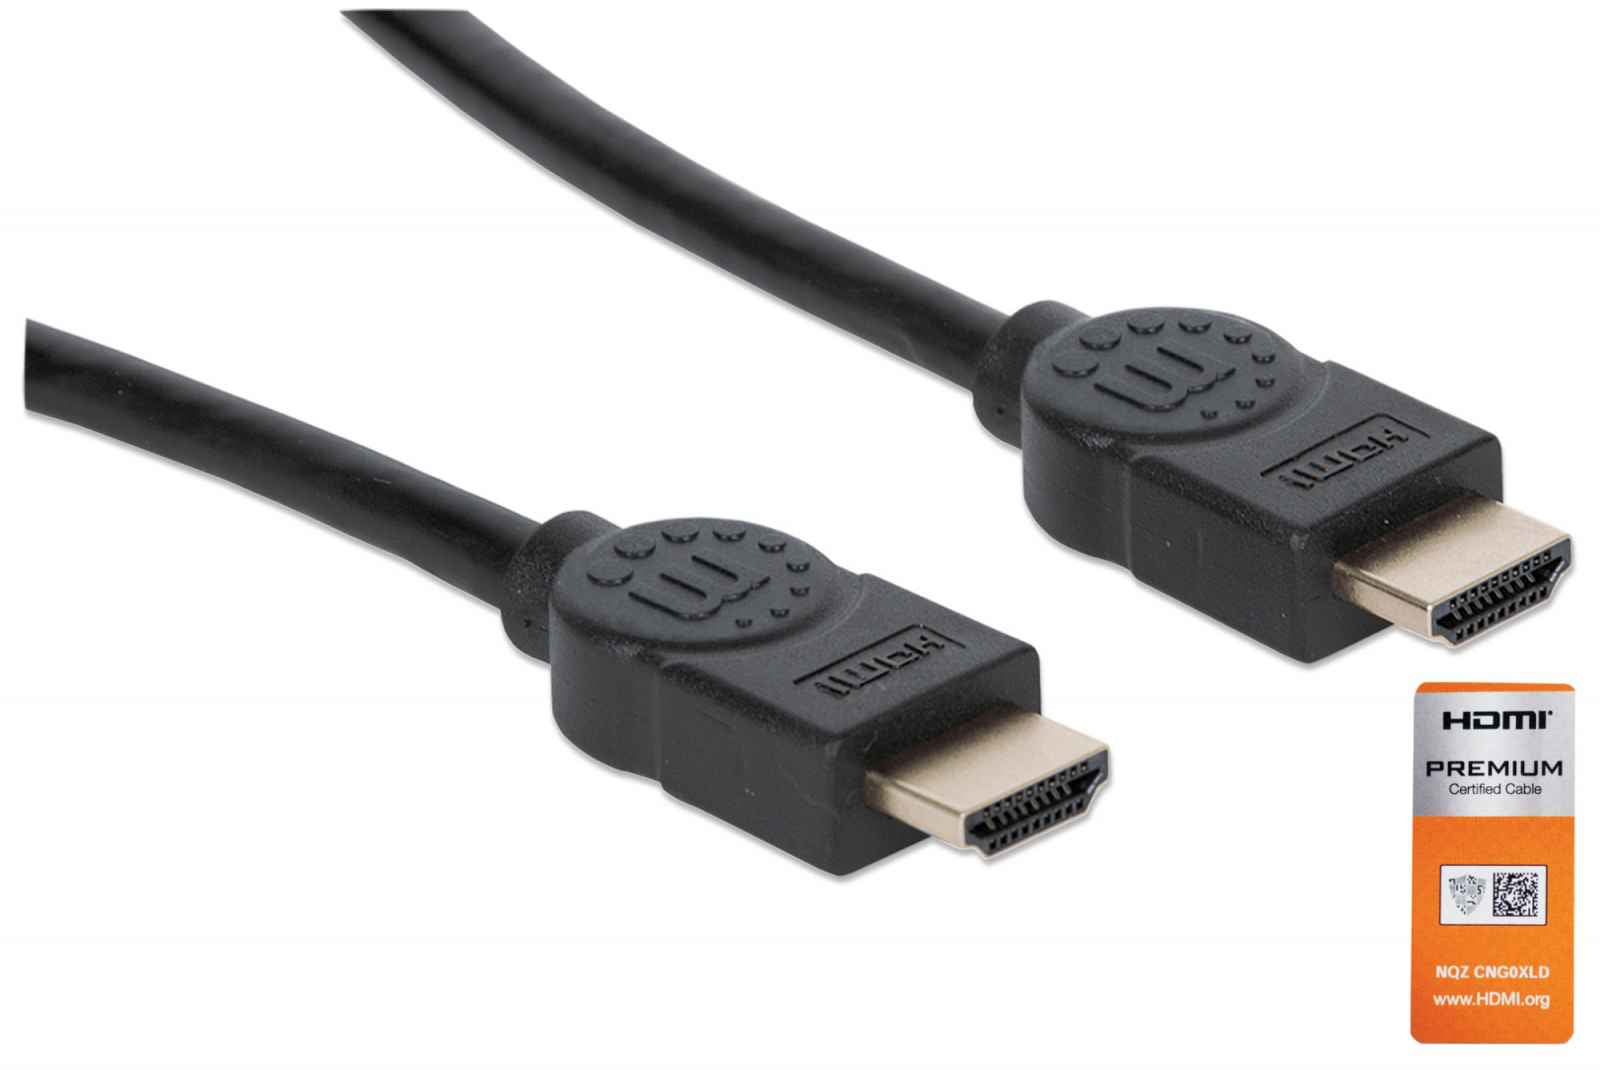 Manhattan HDMI Cable with Ethernet, 4K@60Hz (Premium High Speed), 1.8m, Male to Male, Black, Equivalent to HDMM2MP (except 20cm shorter), Ultra HD 4k x 2k, Fully Shielded, Gold Plated Contacts, Lifetime Warranty, Polybag